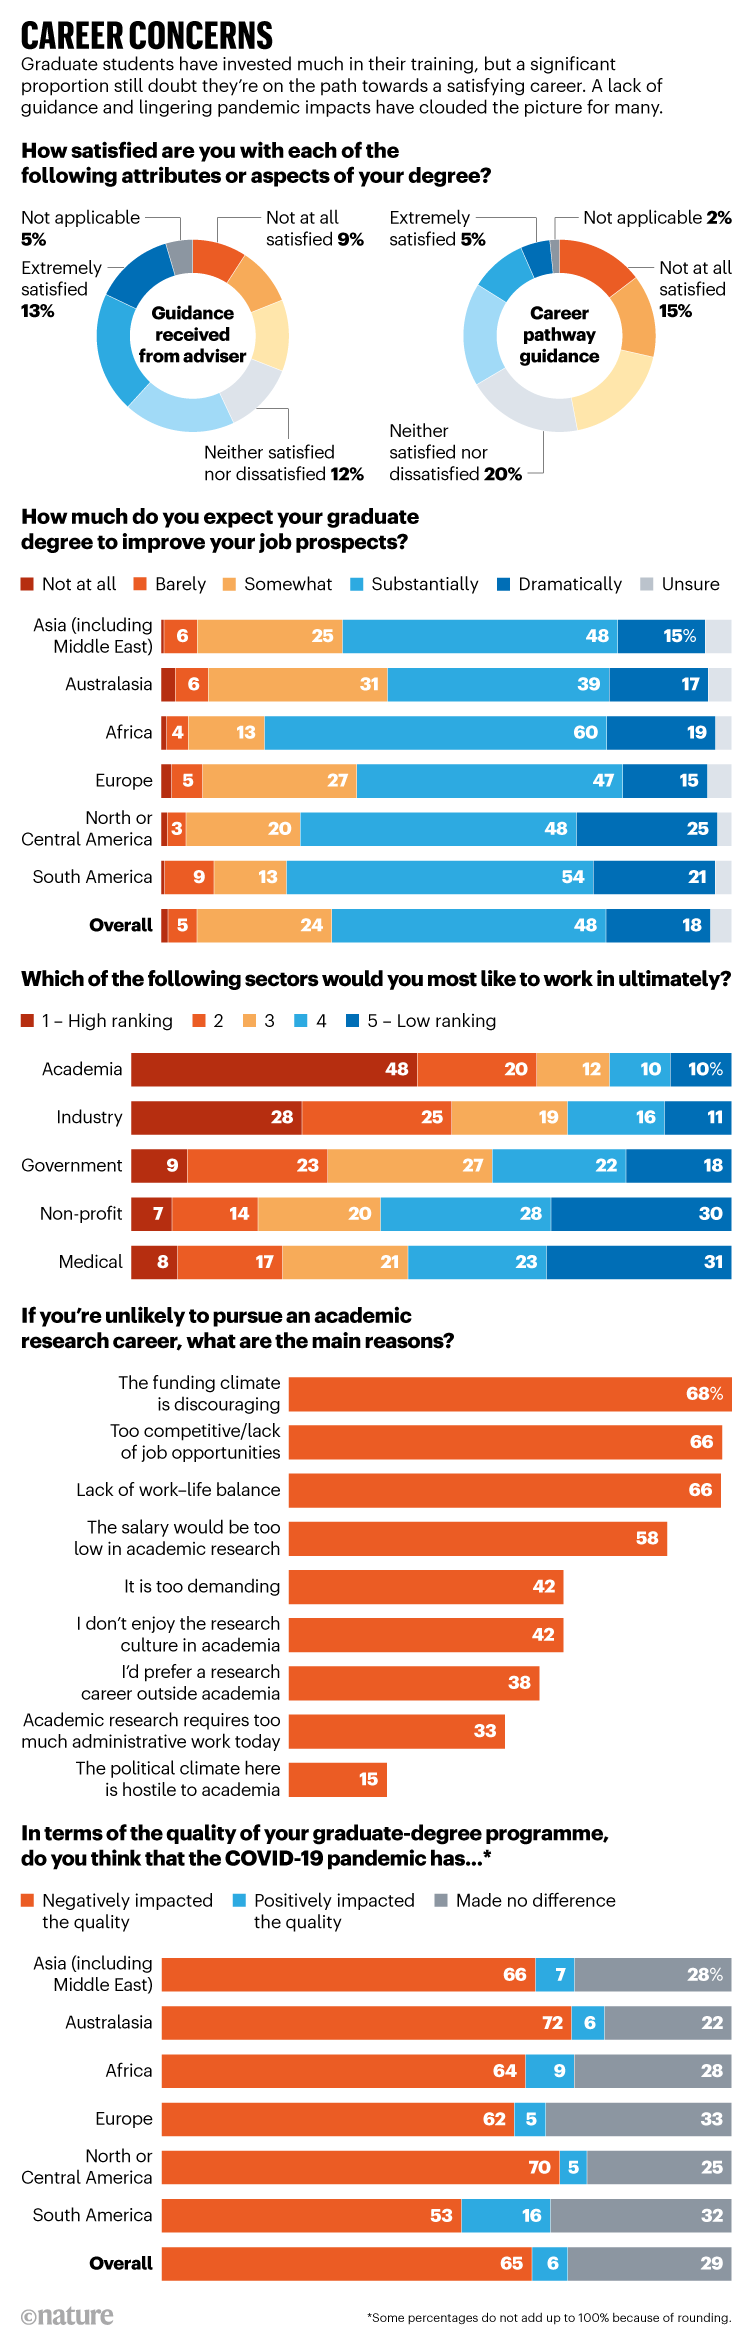 CAREER CONCERNS. Survey results focussing on the career concerns of graduate students.